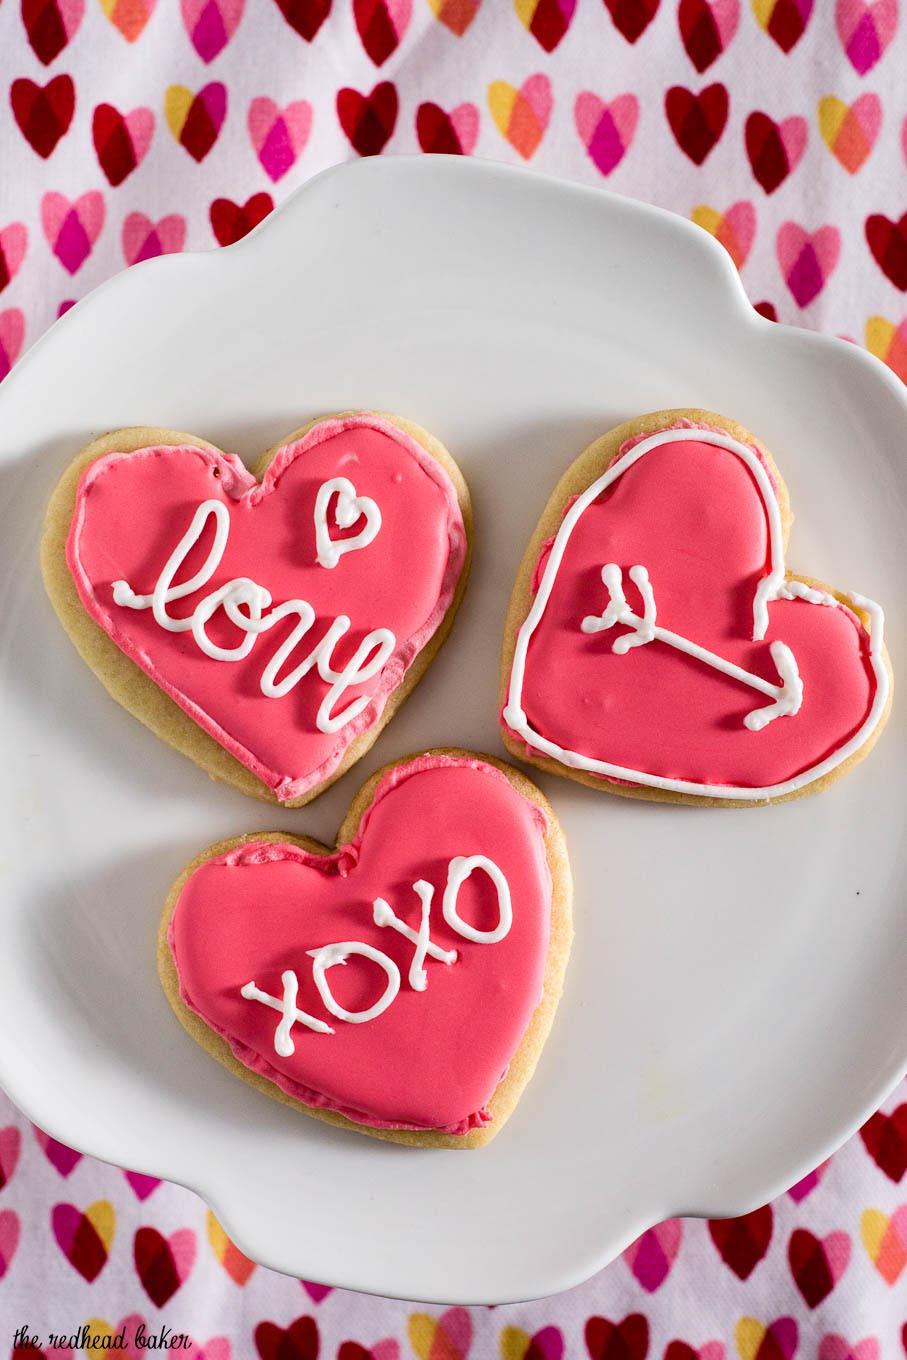 Conversation heart sugar cookies decorated with royal icing deliver your own personal message to your Valentine sweetheart! 